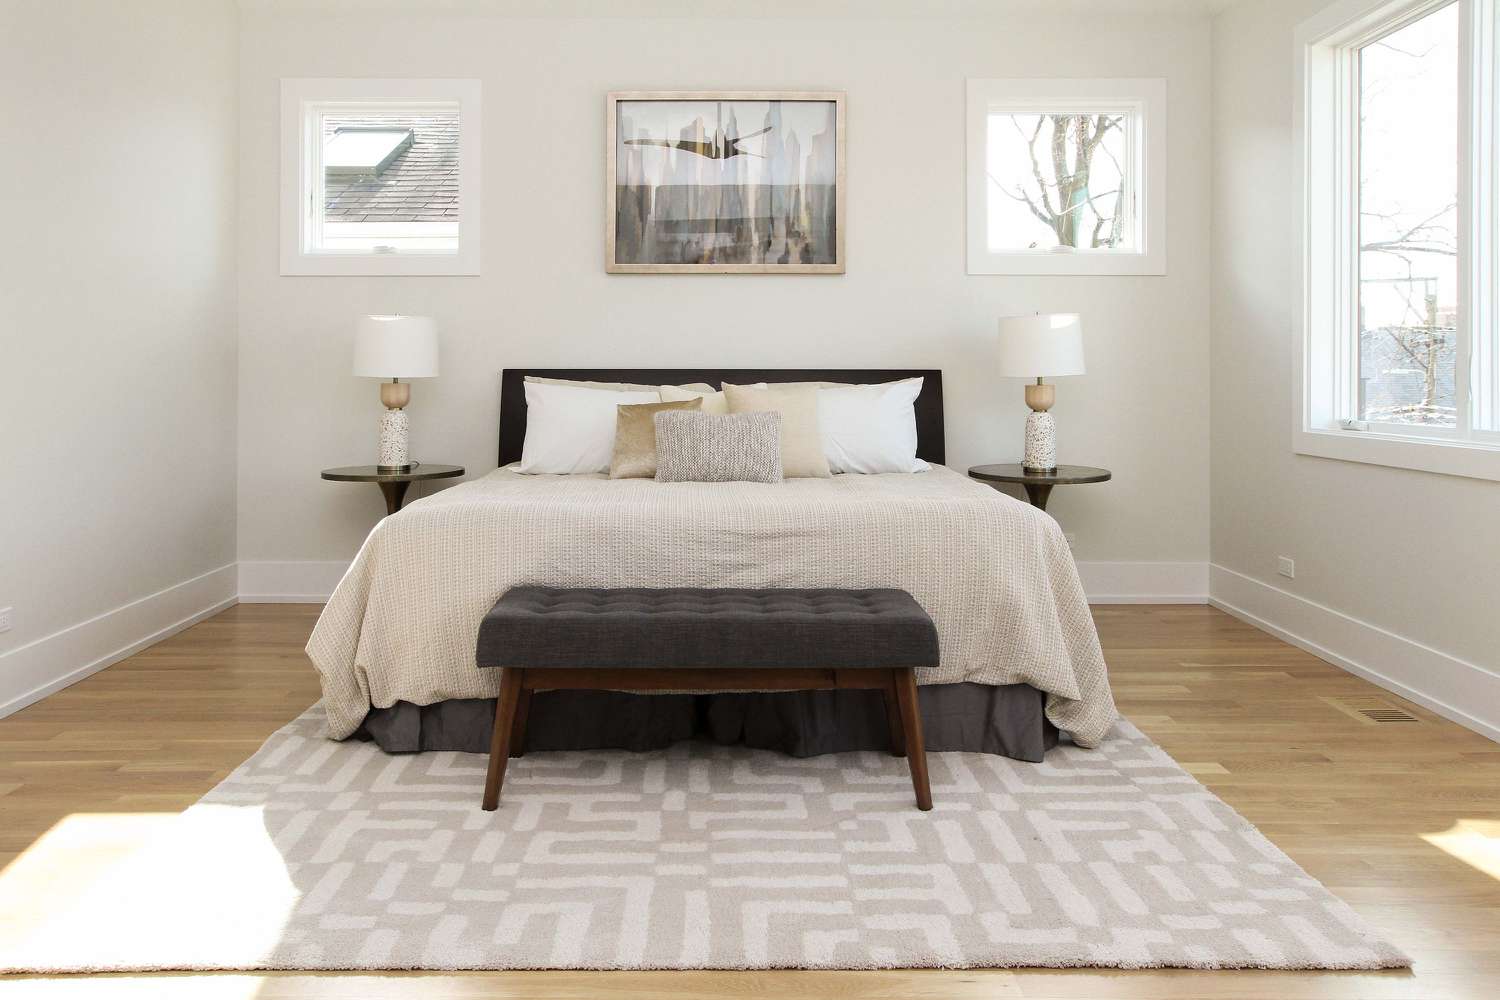 Where Can I Find Inspiration for Neutral Bedroom Color Schemes